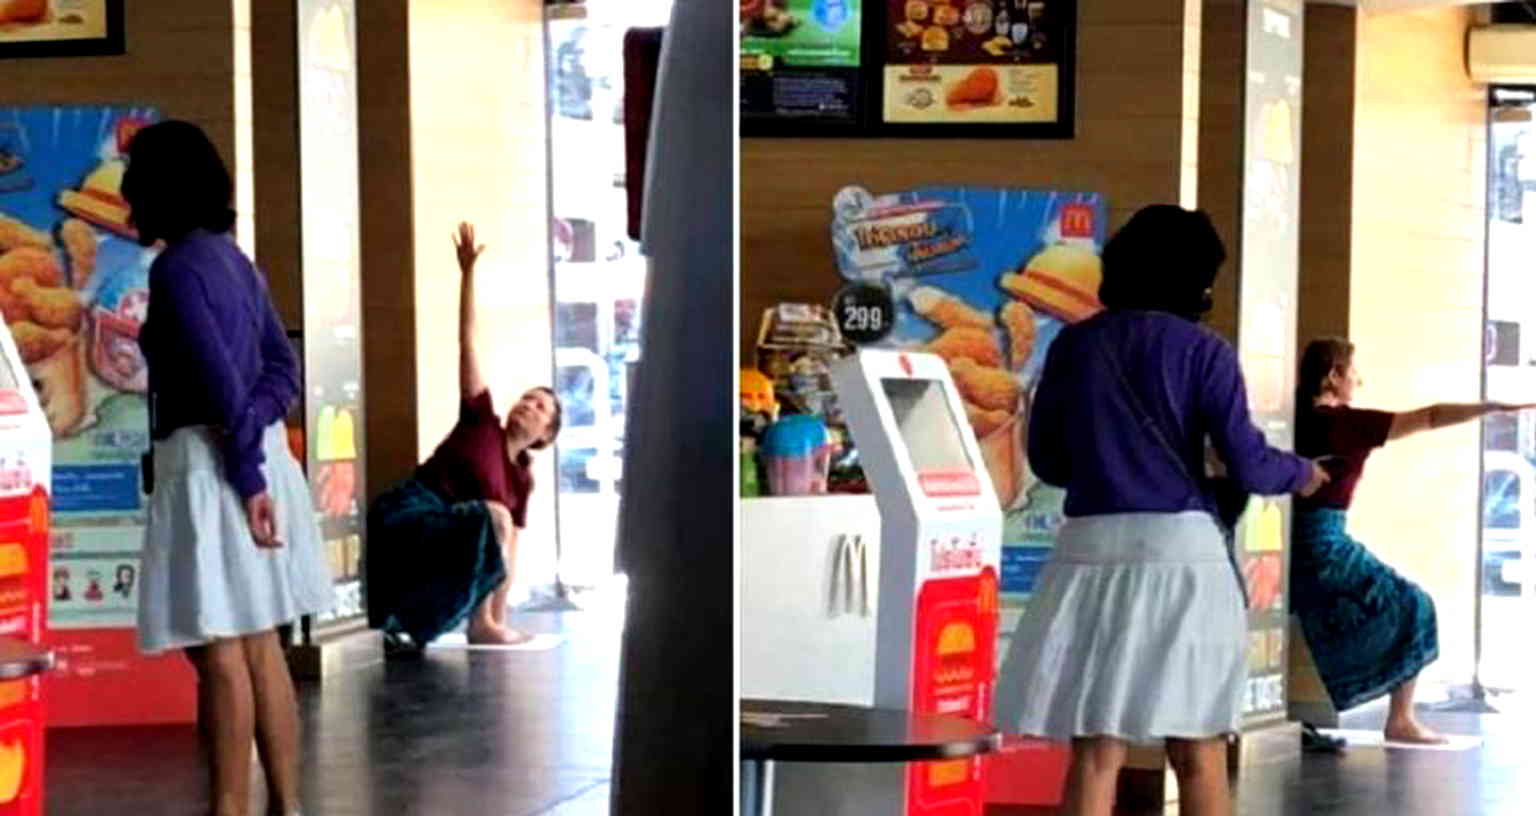 Foreign Woman Does Impromptu Yoga Session Inside a McDonald’s in Thailand